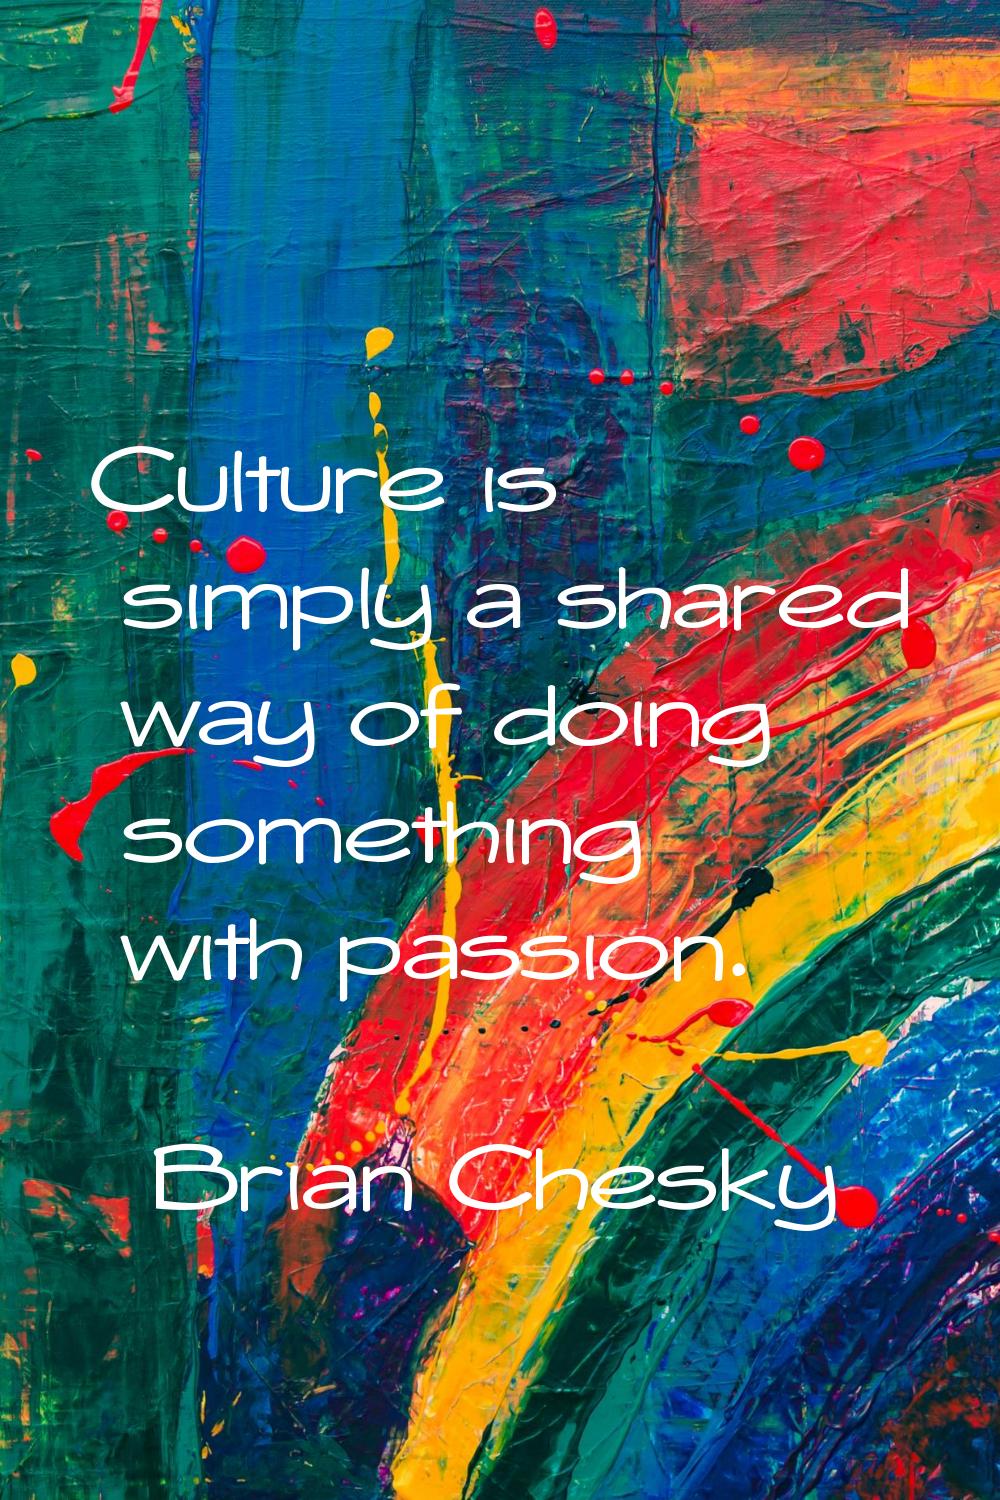 Culture is simply a shared way of doing something with passion.